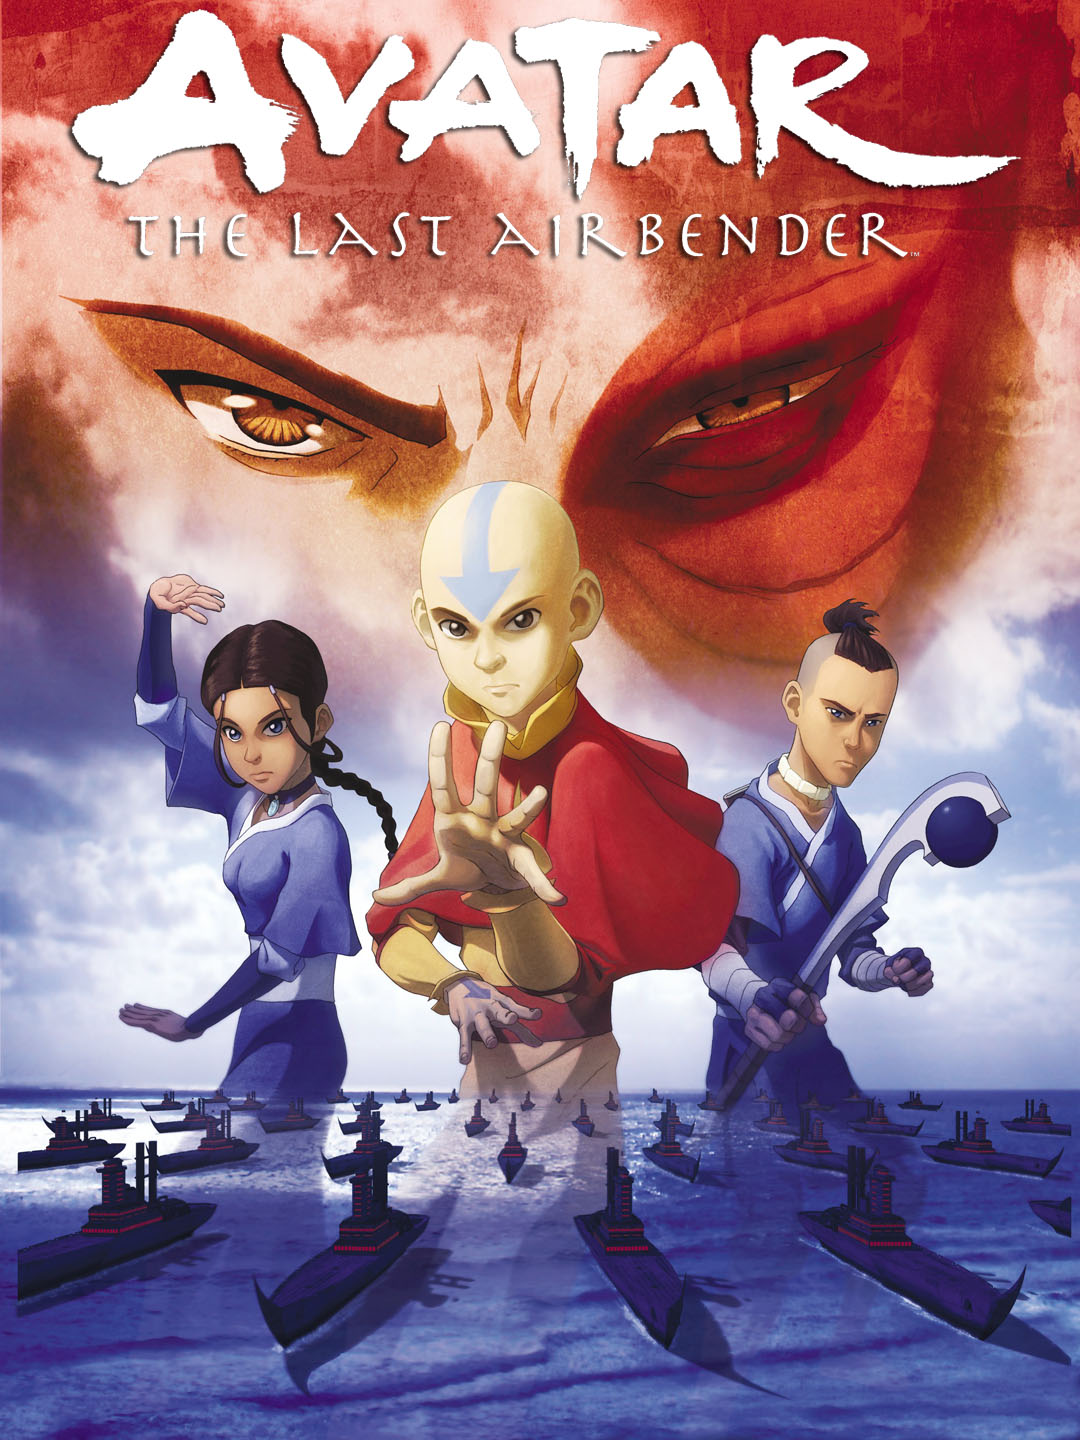 The Last Airbender 2010 is a Guilty Movie Pleasure  YouTube